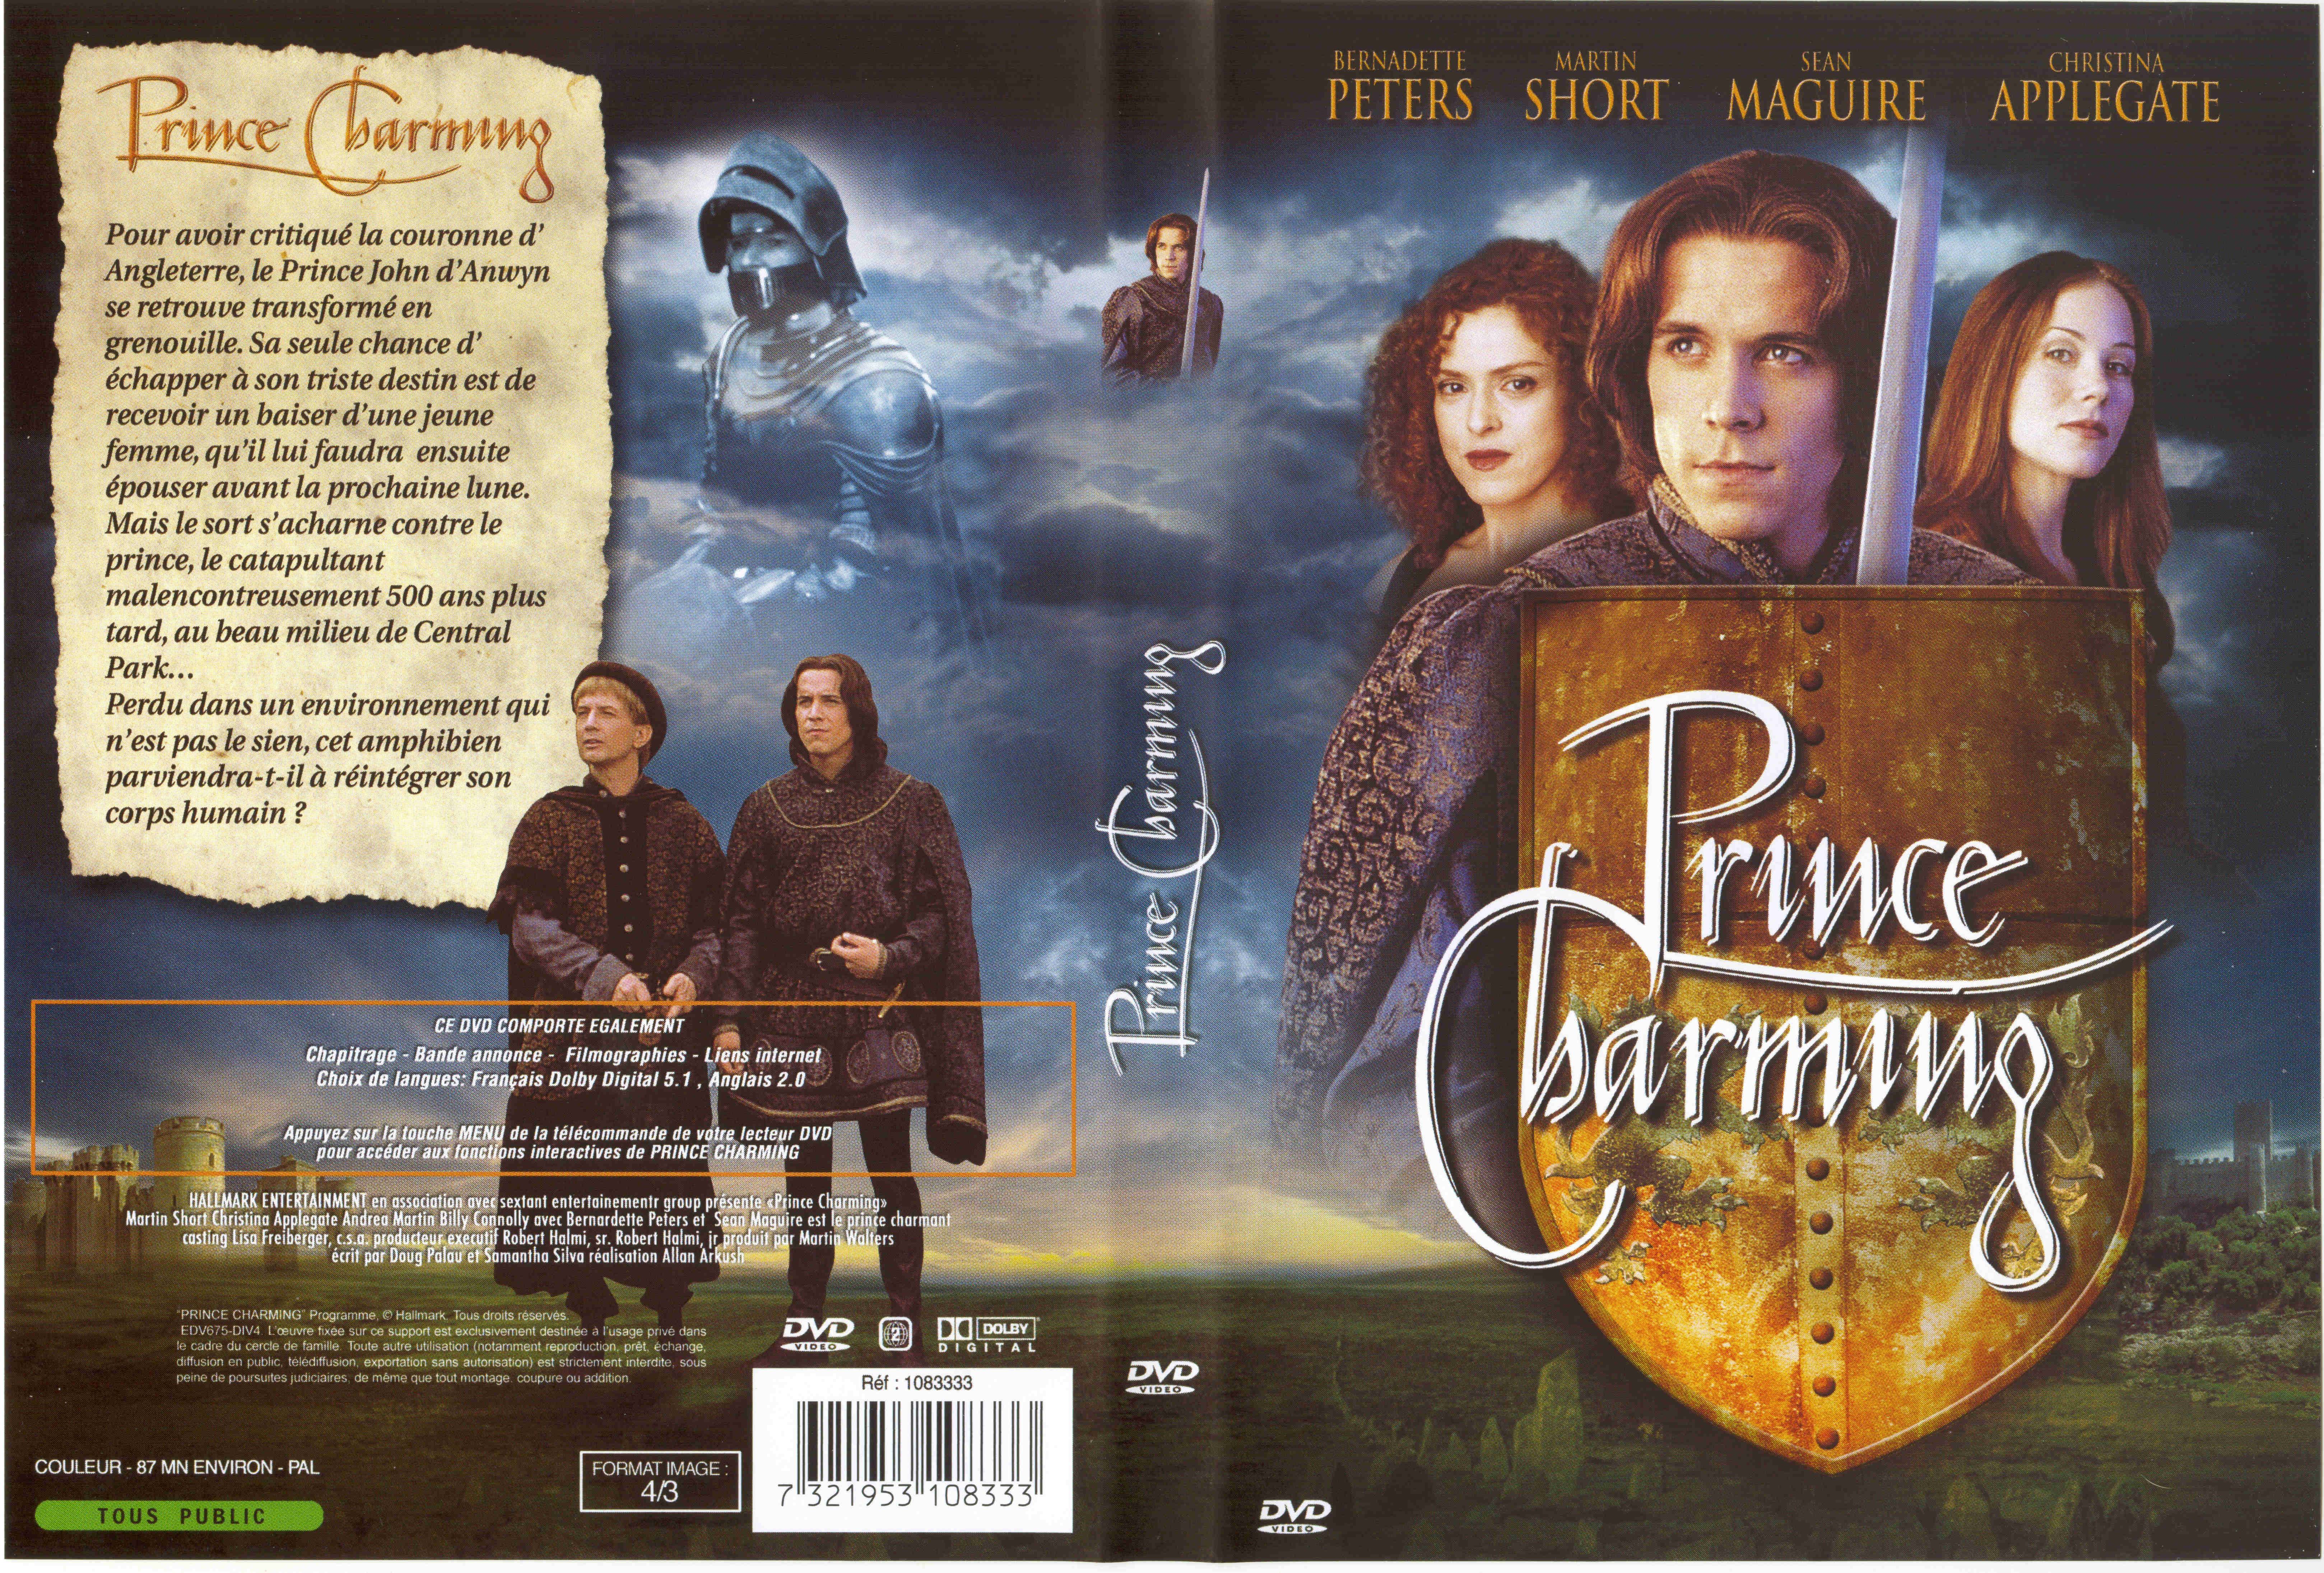 Jaquette DVD Prince charming